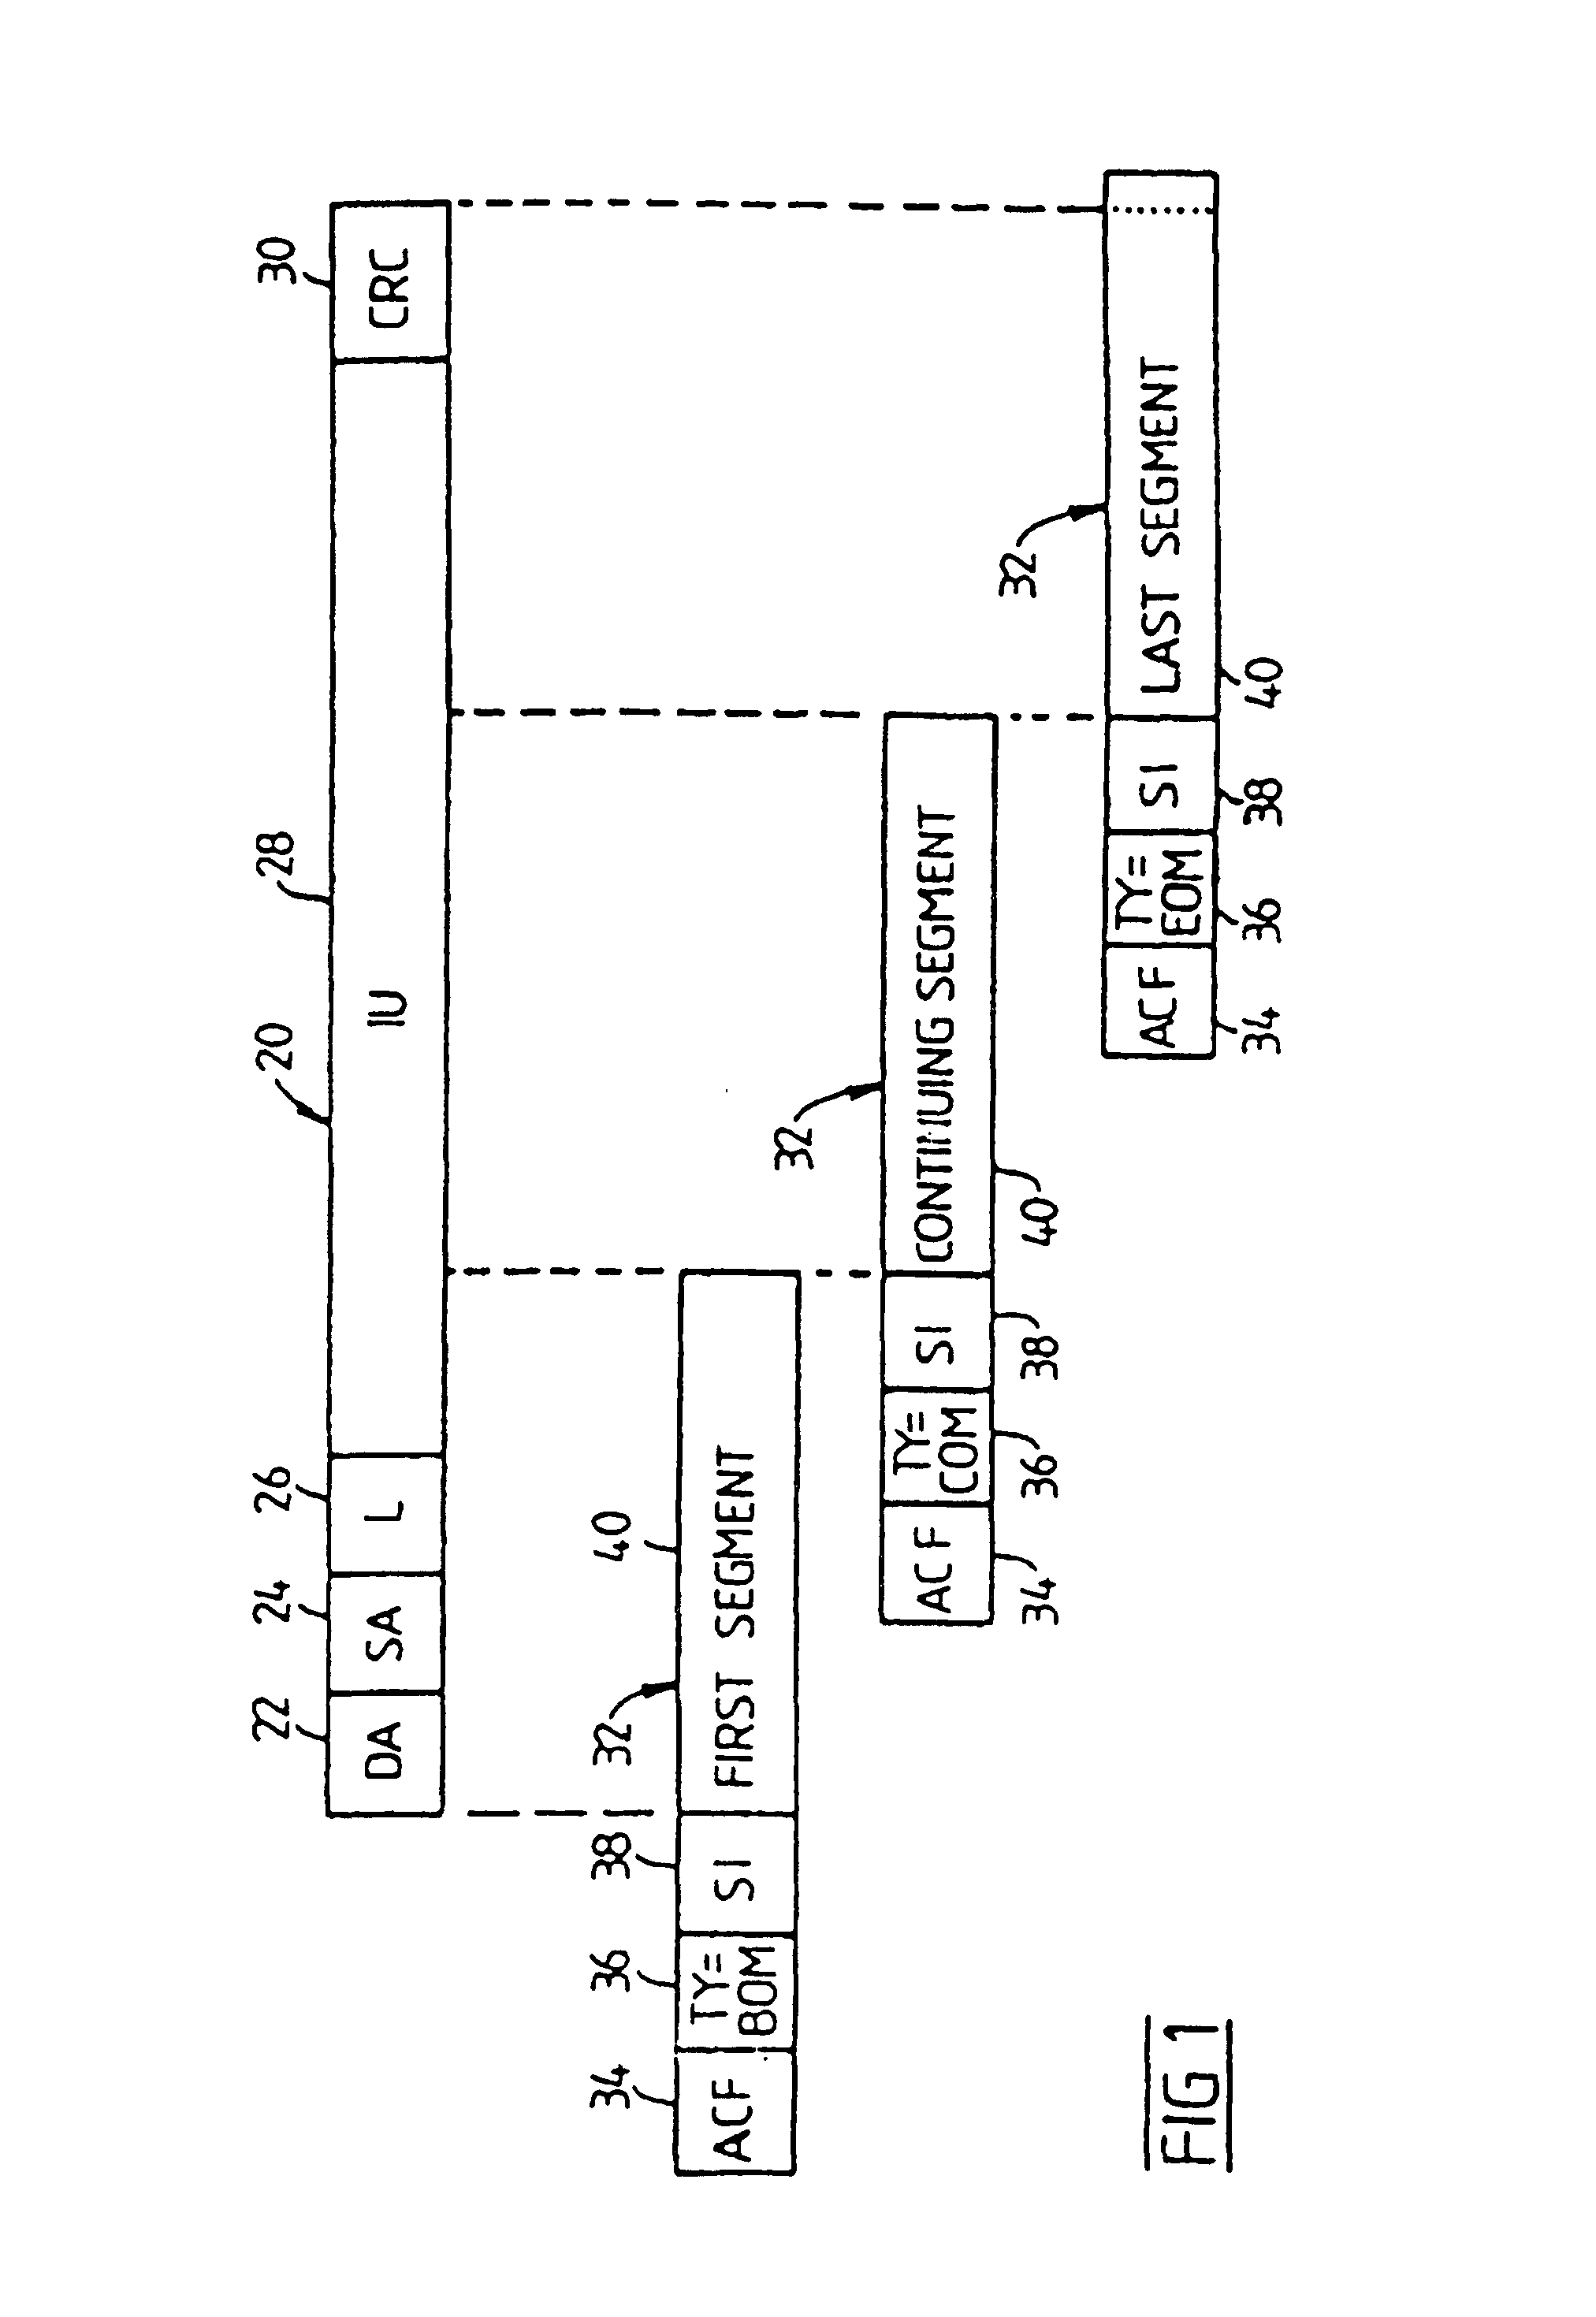 Transfer of messages in a multiplexed system